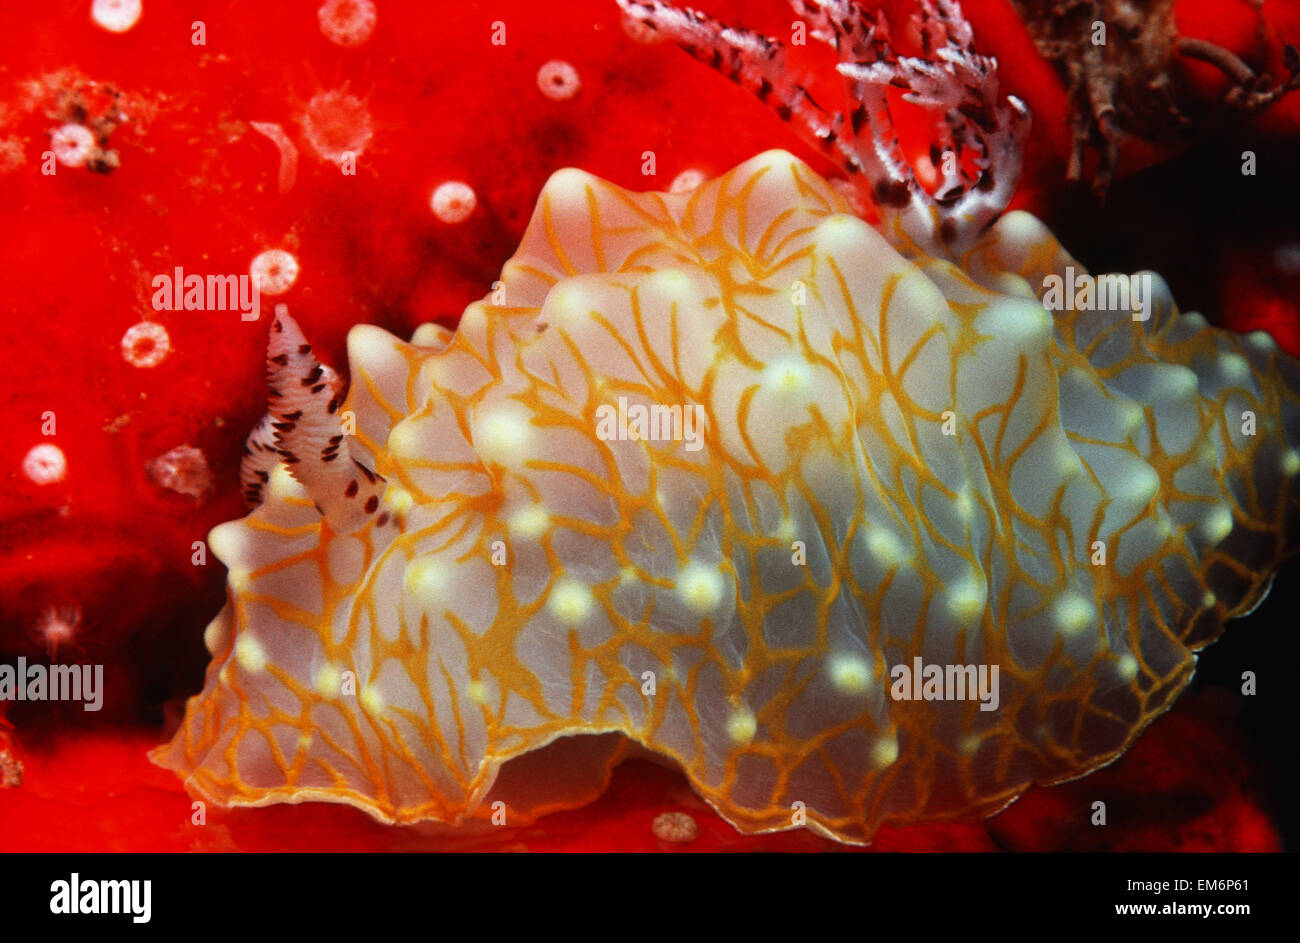 USA, With Red Sponge; Hawaii, Gold-Lace Nudibranch Stock Photo